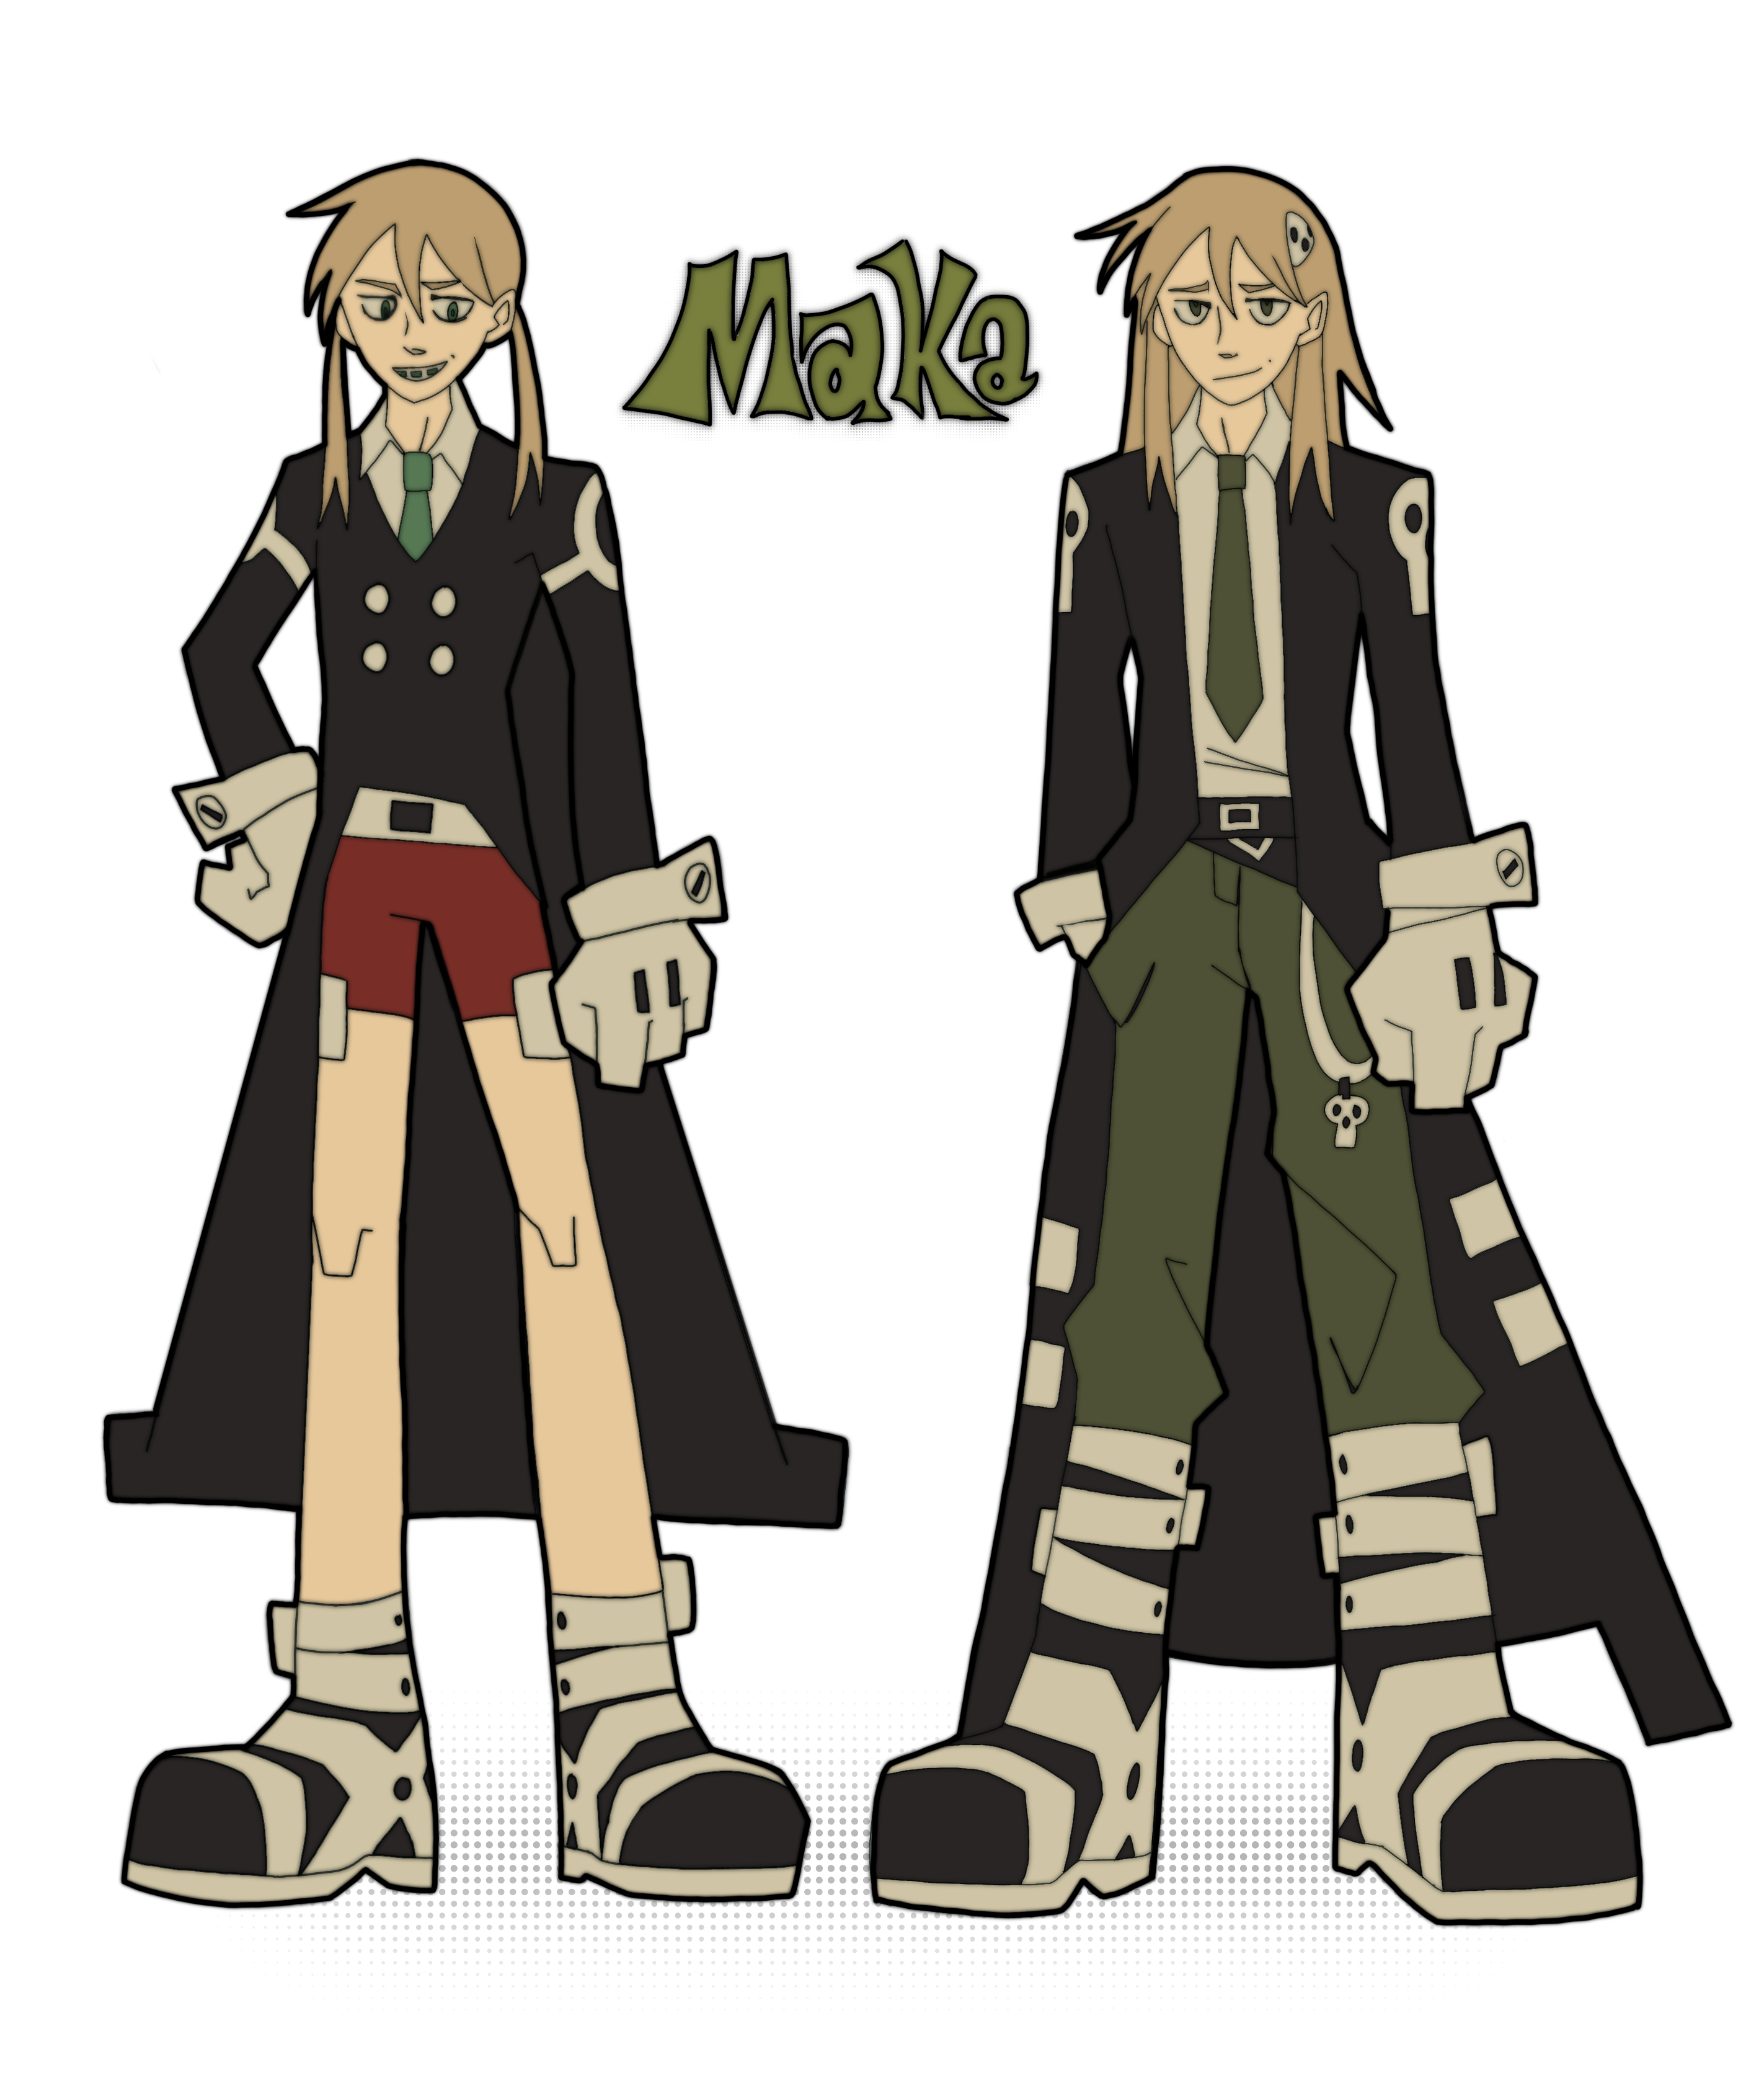 A take on Maka Albarn from Soul Eater's design in my style. Soul Eater is one of my biggest character design inspirations and I had fun creating a 